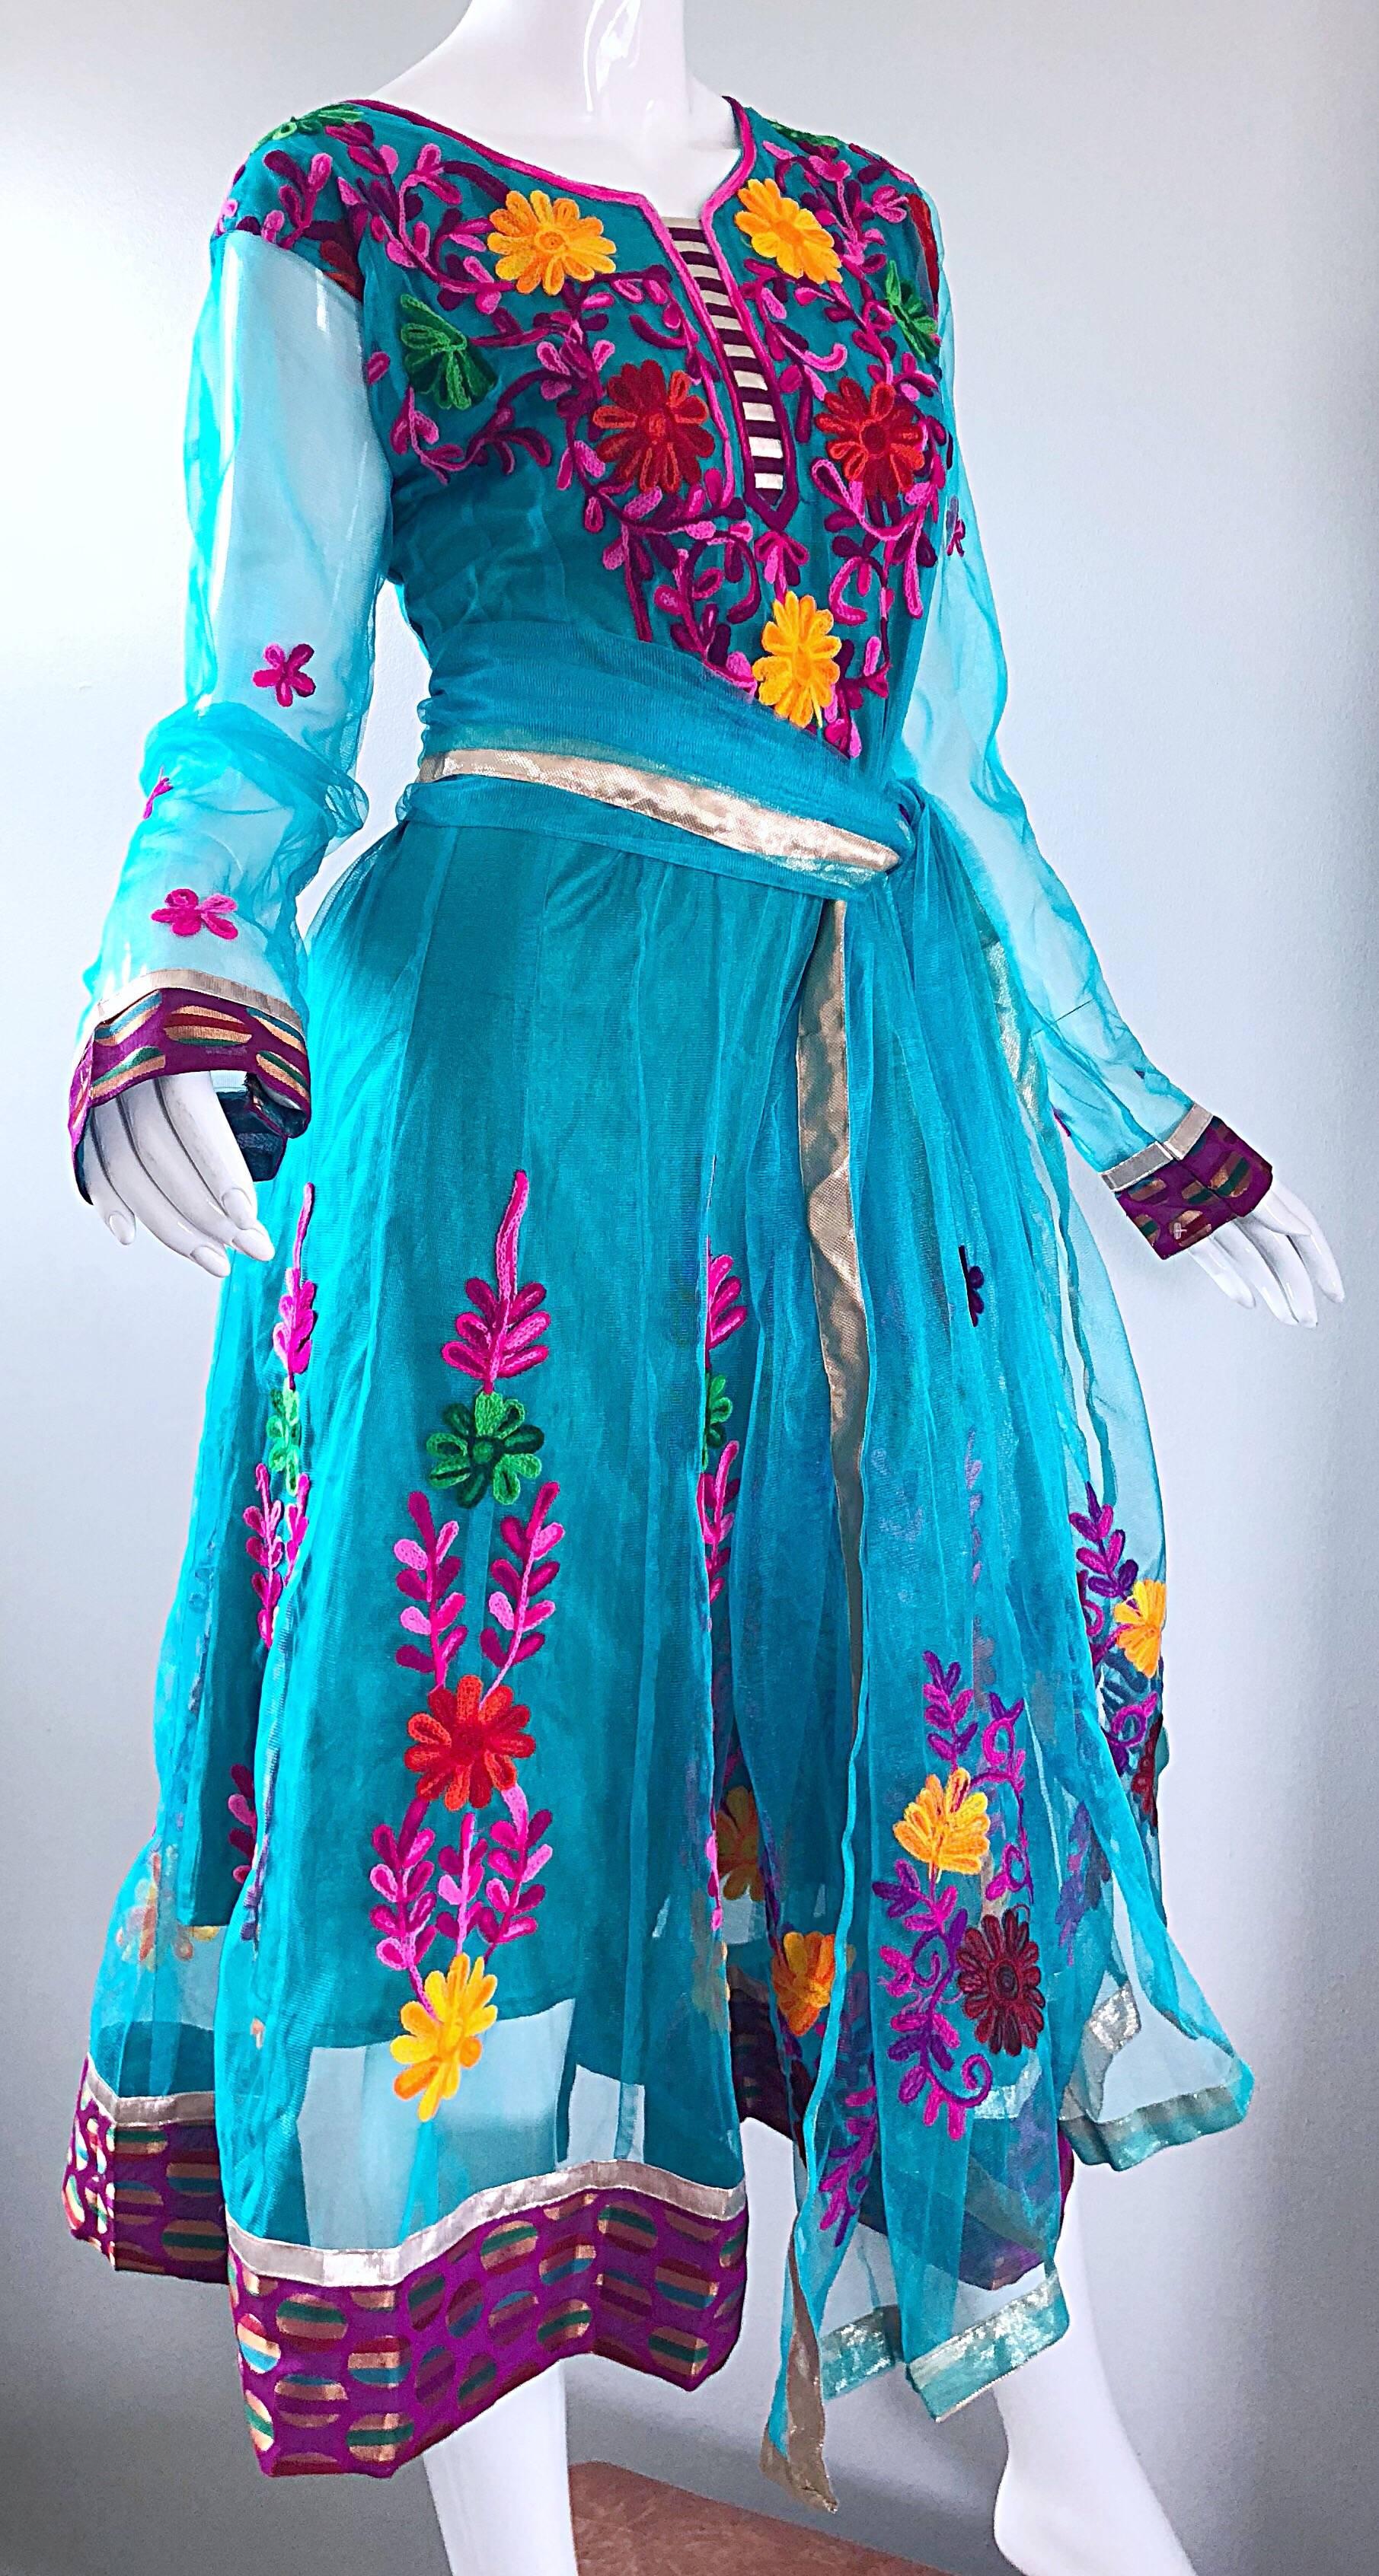 Gorgeous 1970s Turquoise Blue Embroidered Vintage Indian Kurta 70s Dress + Sash For Sale 1